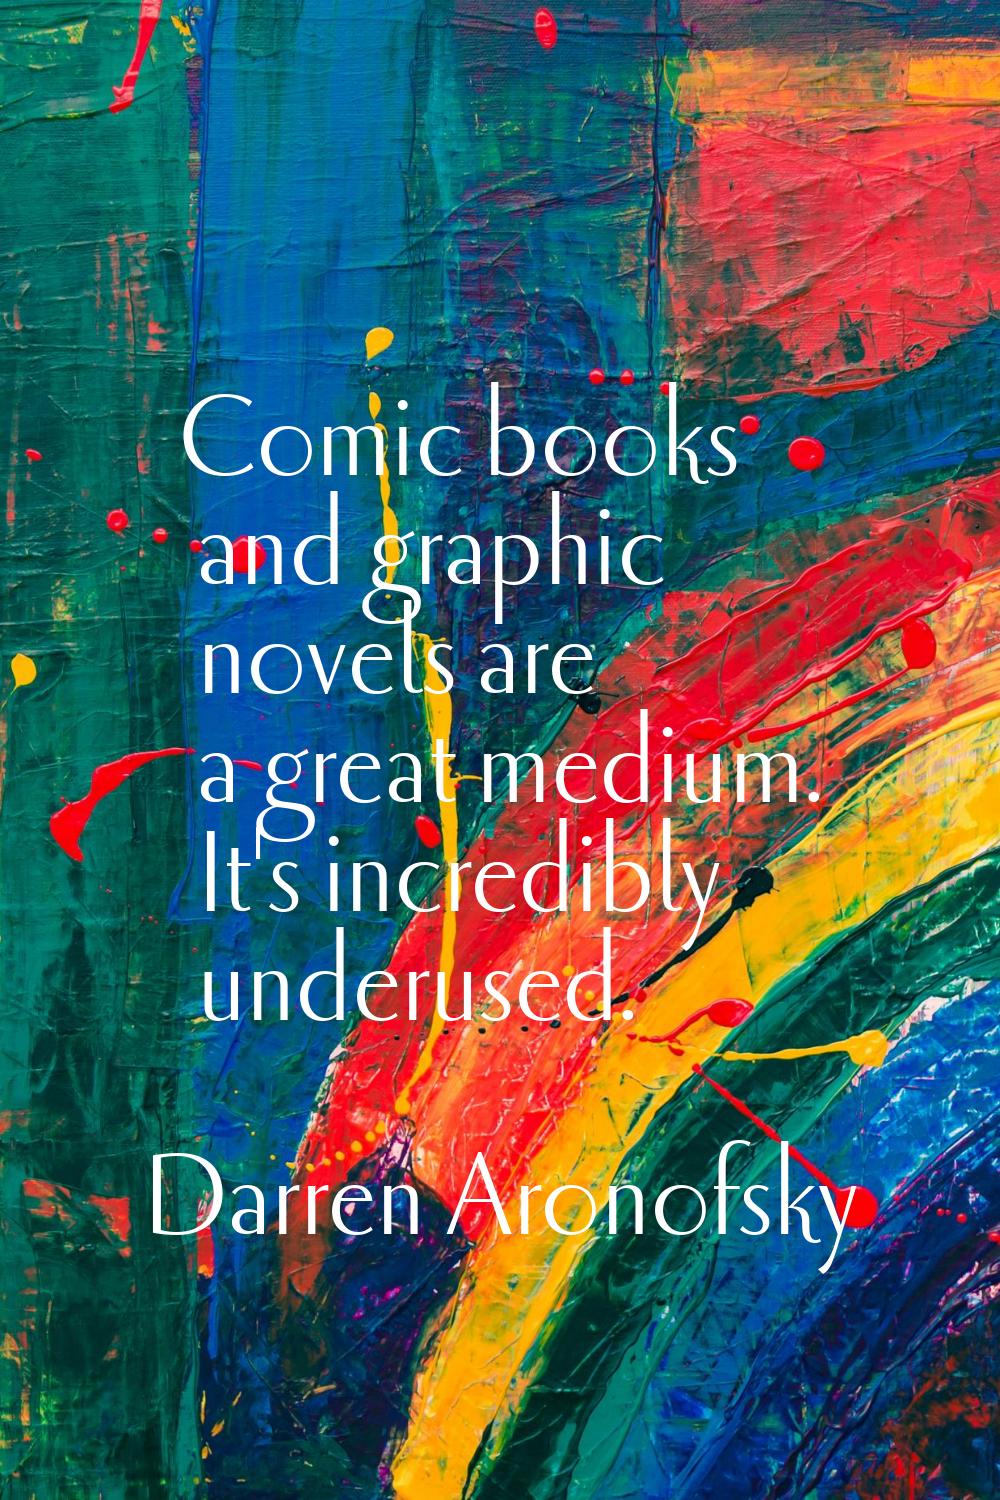 Comic books and graphic novels are a great medium. It's incredibly underused.